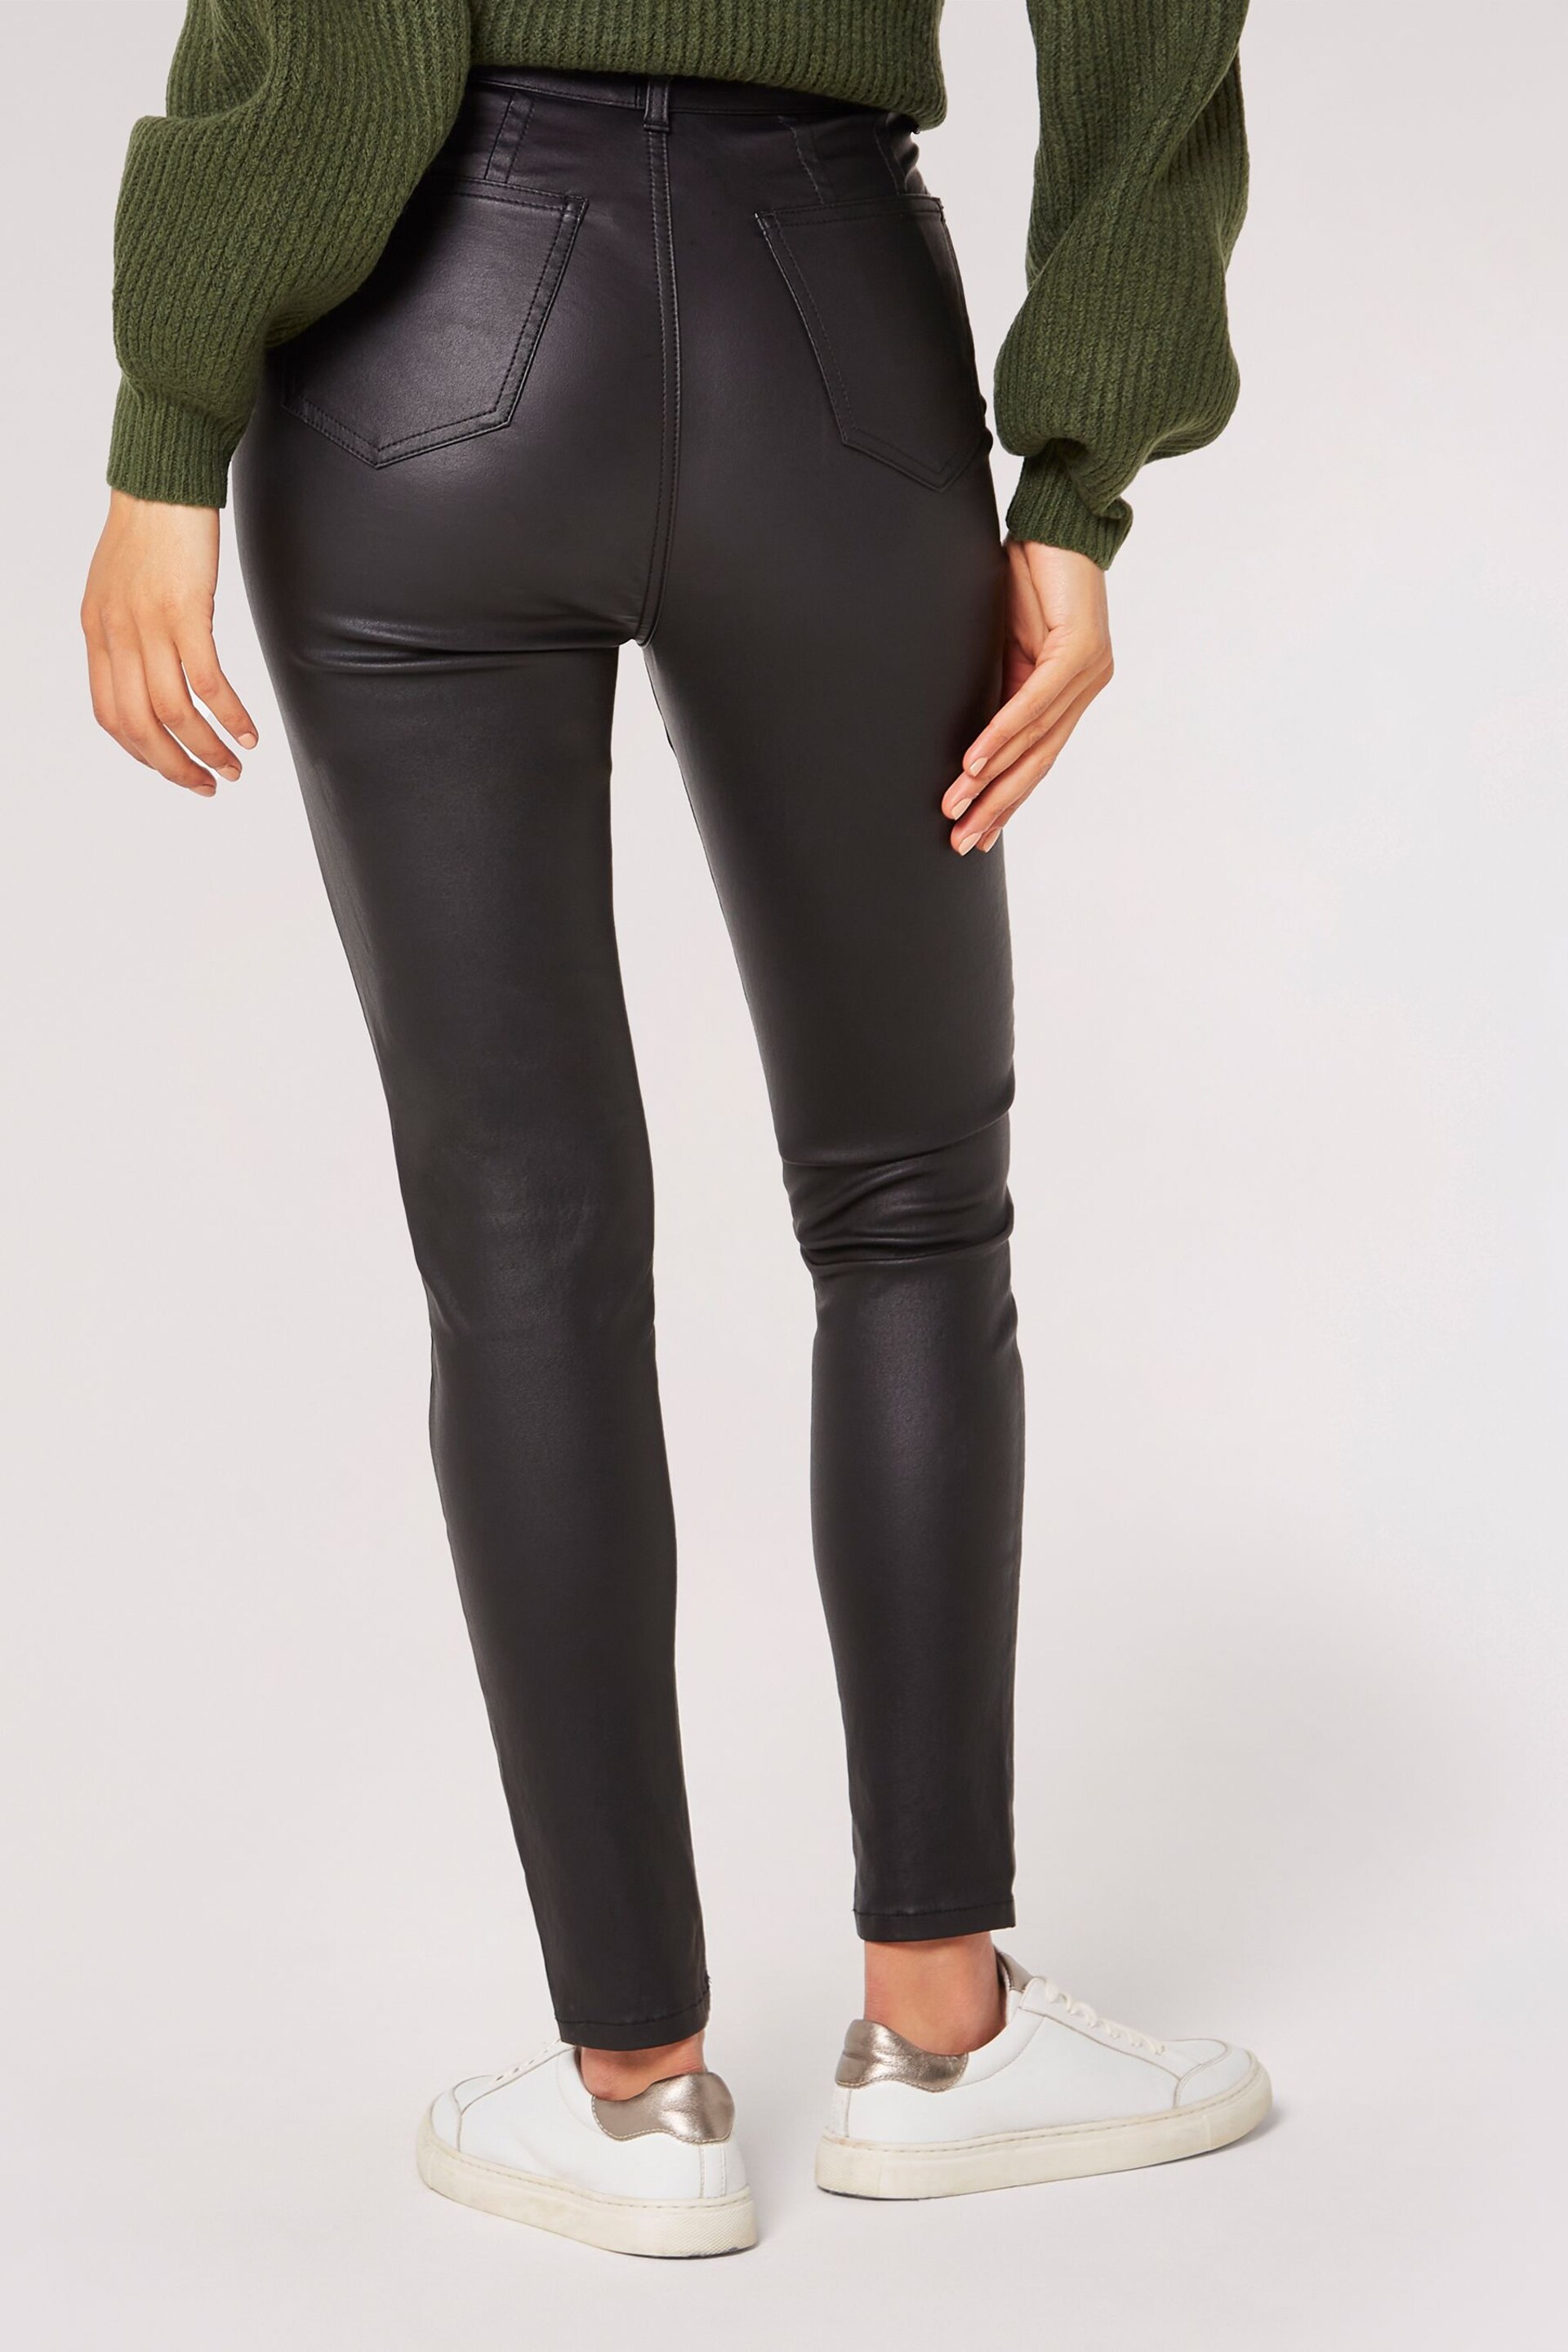 Apricot Black Leather Look Belted Trousers - Image 2 of 4